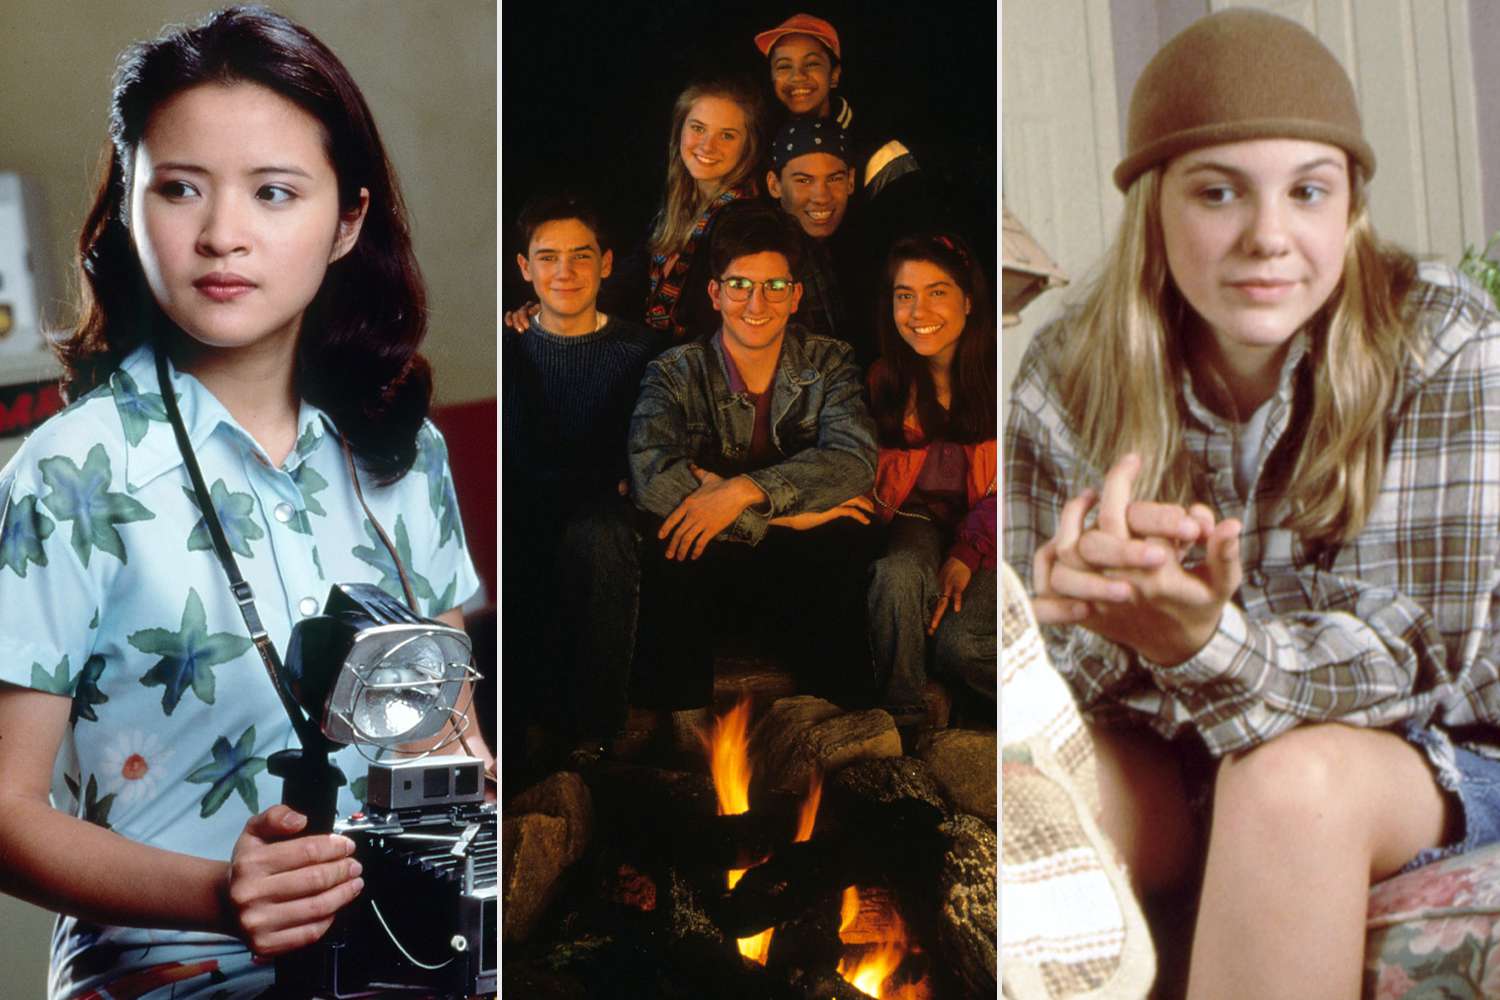 Teen Shows of the '90s You May Have Forgotten About